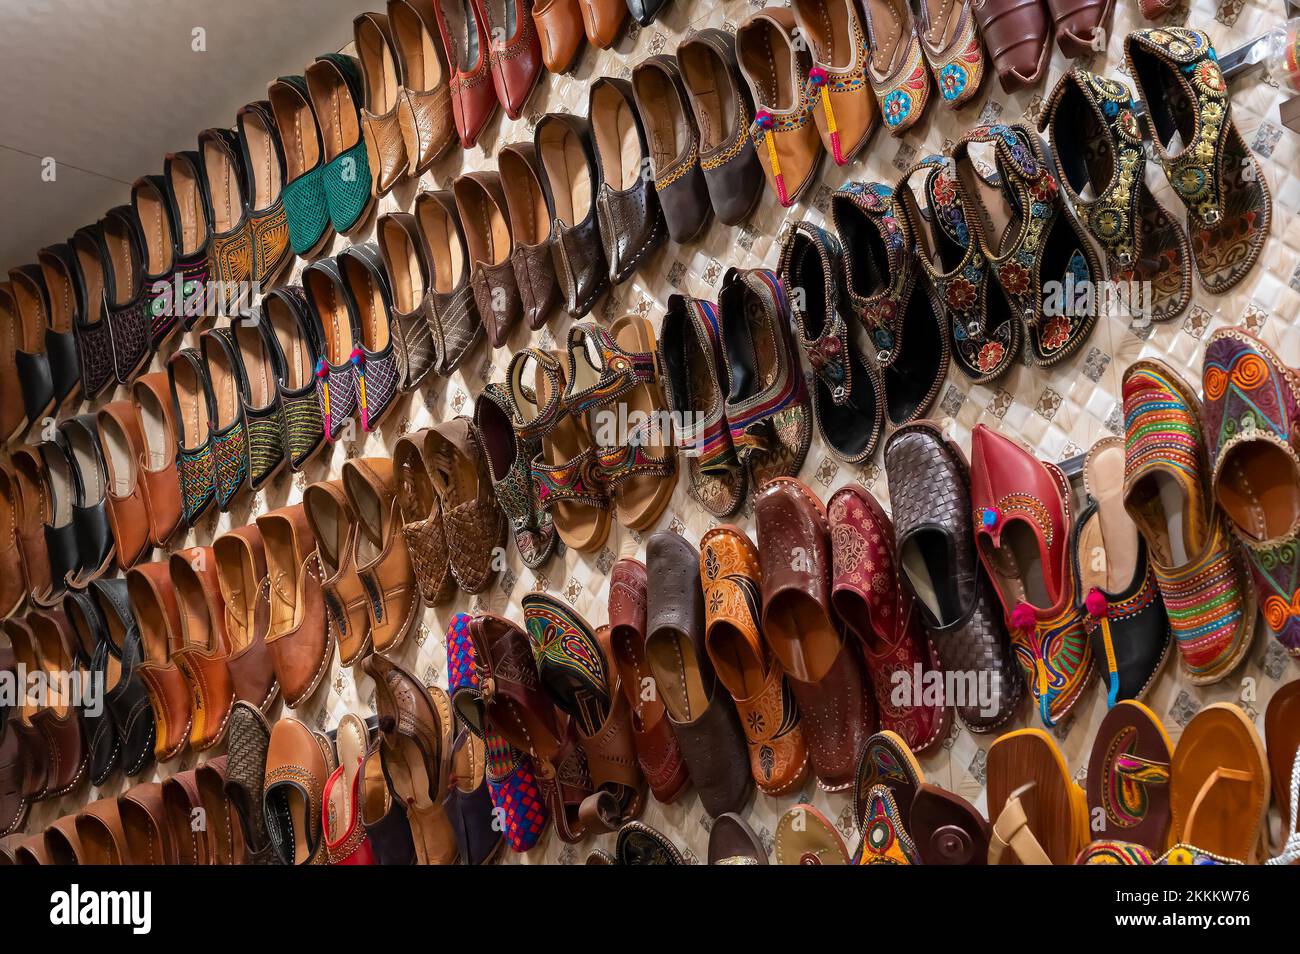 Colorful Rajsathani ladies shoes are being sold at famous Sardar Market and Ghanta ghar Clock tower in Jodhpur, Rajasthan, India. Stock Photo